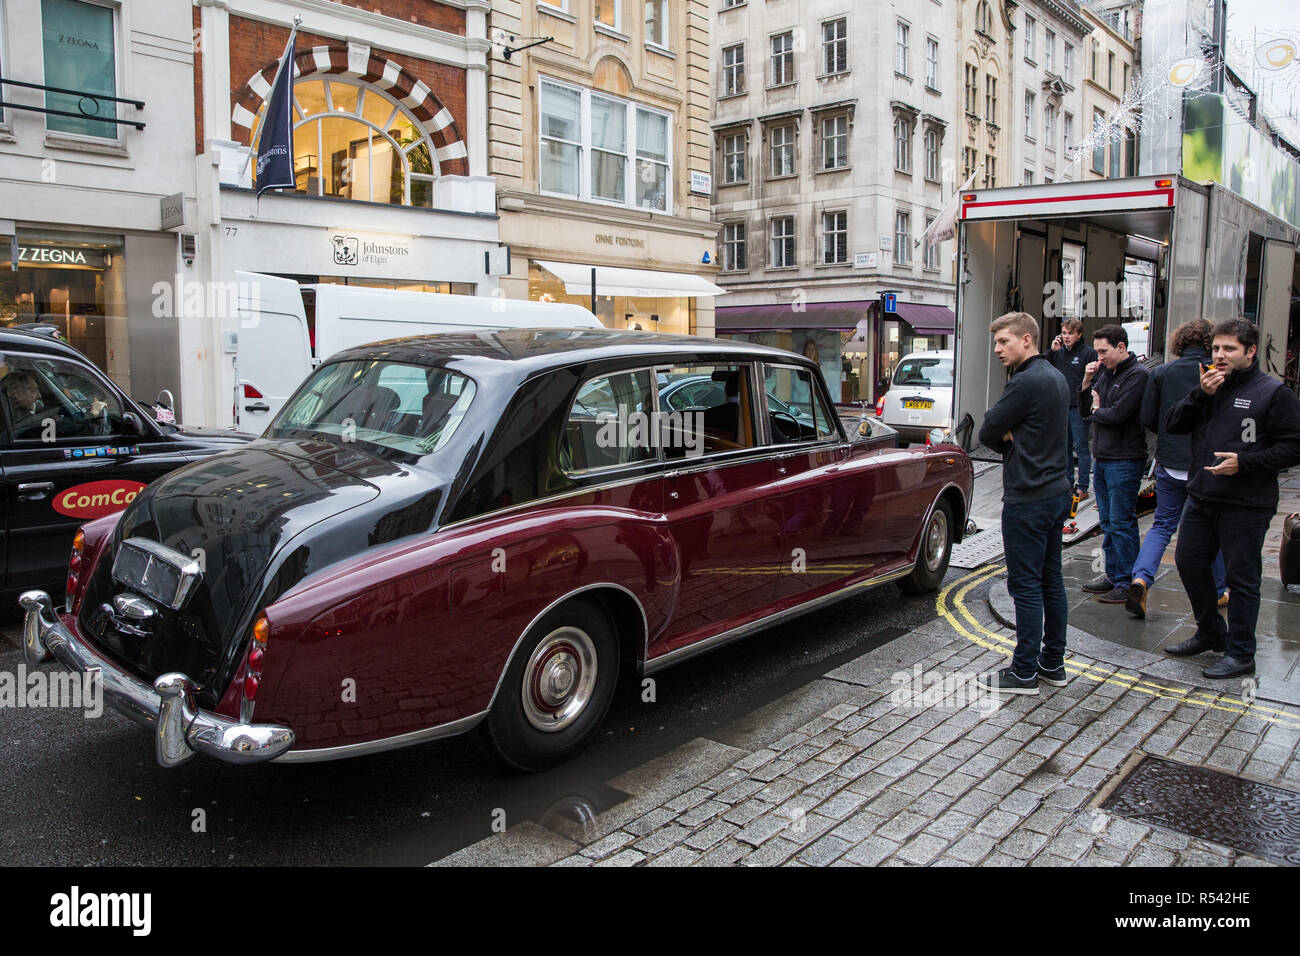 London, UK. 29th November, 2018. Bonhams' staff move a C.1979 Rolls-Royce Phantom VI Limousine, loaned on occasions to the Royal Household, in preparation for an auction of historic and high-performance racing and road cars. Highlights include a Le Mans class-winning Jaguar XJ220C driven by David Coulthard (£2,200,000-2,800,000), a Lister Jaguar Knobbly (£2,200,000-2,800,000) and a 1958 BMW 507 owned by its designer, as well as Ferraris, Aston Martins, Bentleys, Porsches and Jaguars. Credit: Mark Kerrison/Alamy Live News Stock Photo